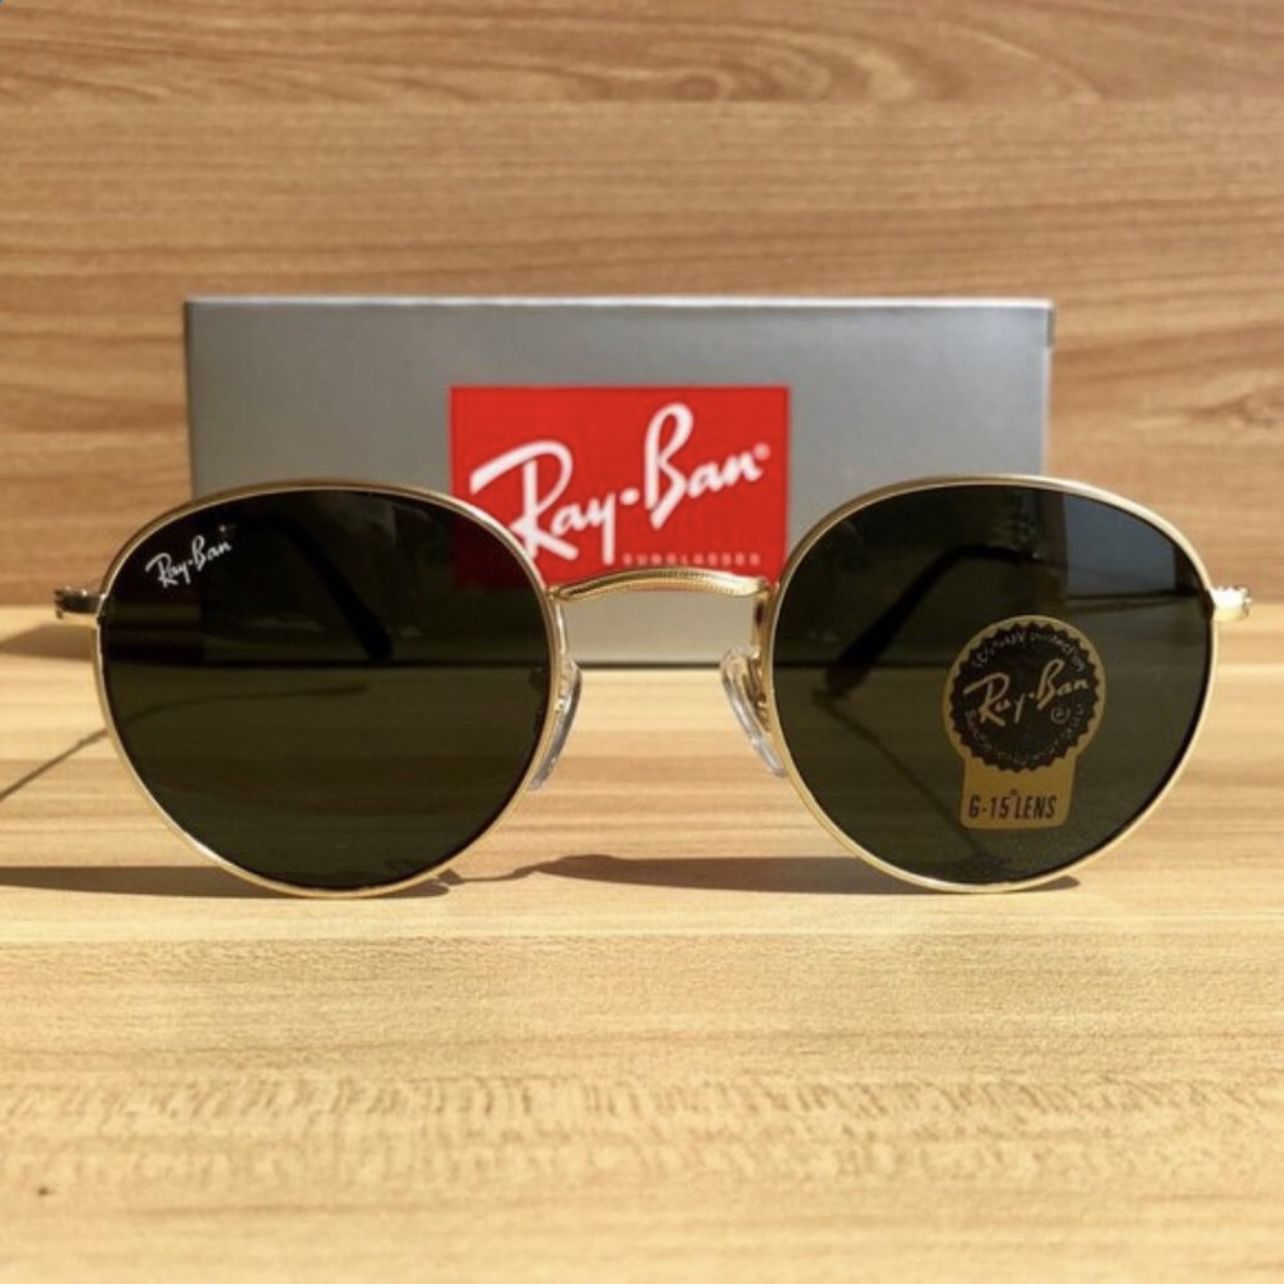 Ray Ban Black Classic real glass lenses Round Gold Frame style Unisex Standard size 50mm w/Accessories Like New